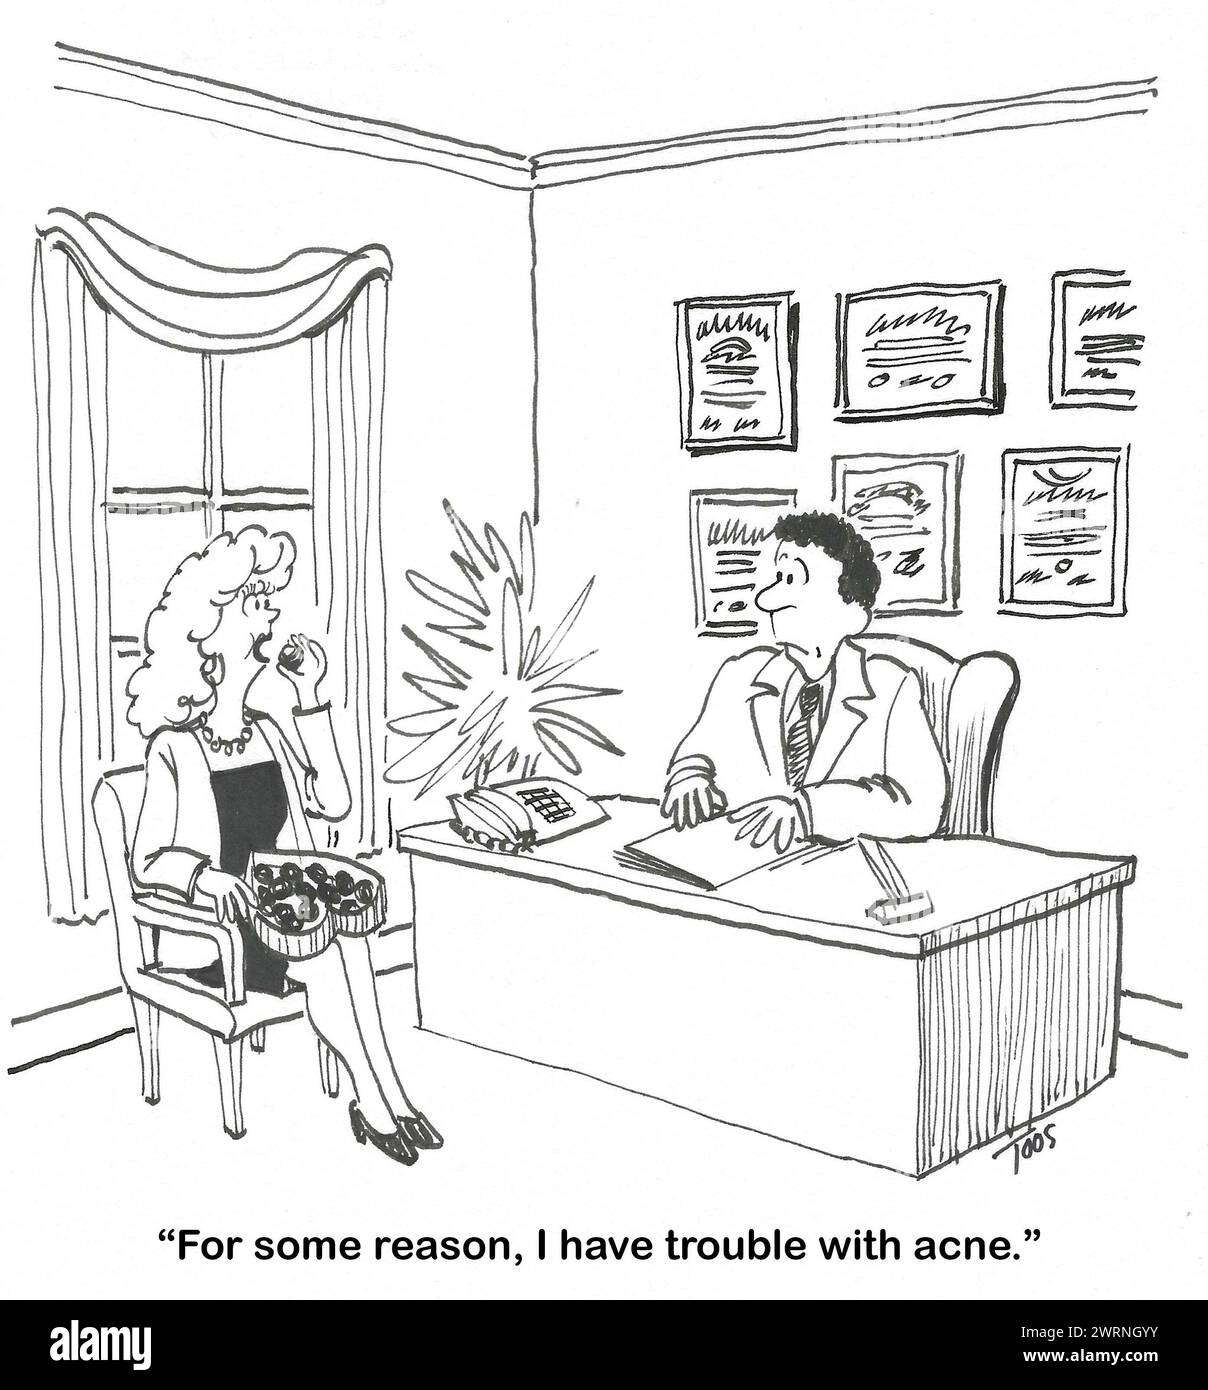 BW cartoon of a woman at a dermatologist's office.  She is eating chocolate and has trouble with acne. Stock Photo